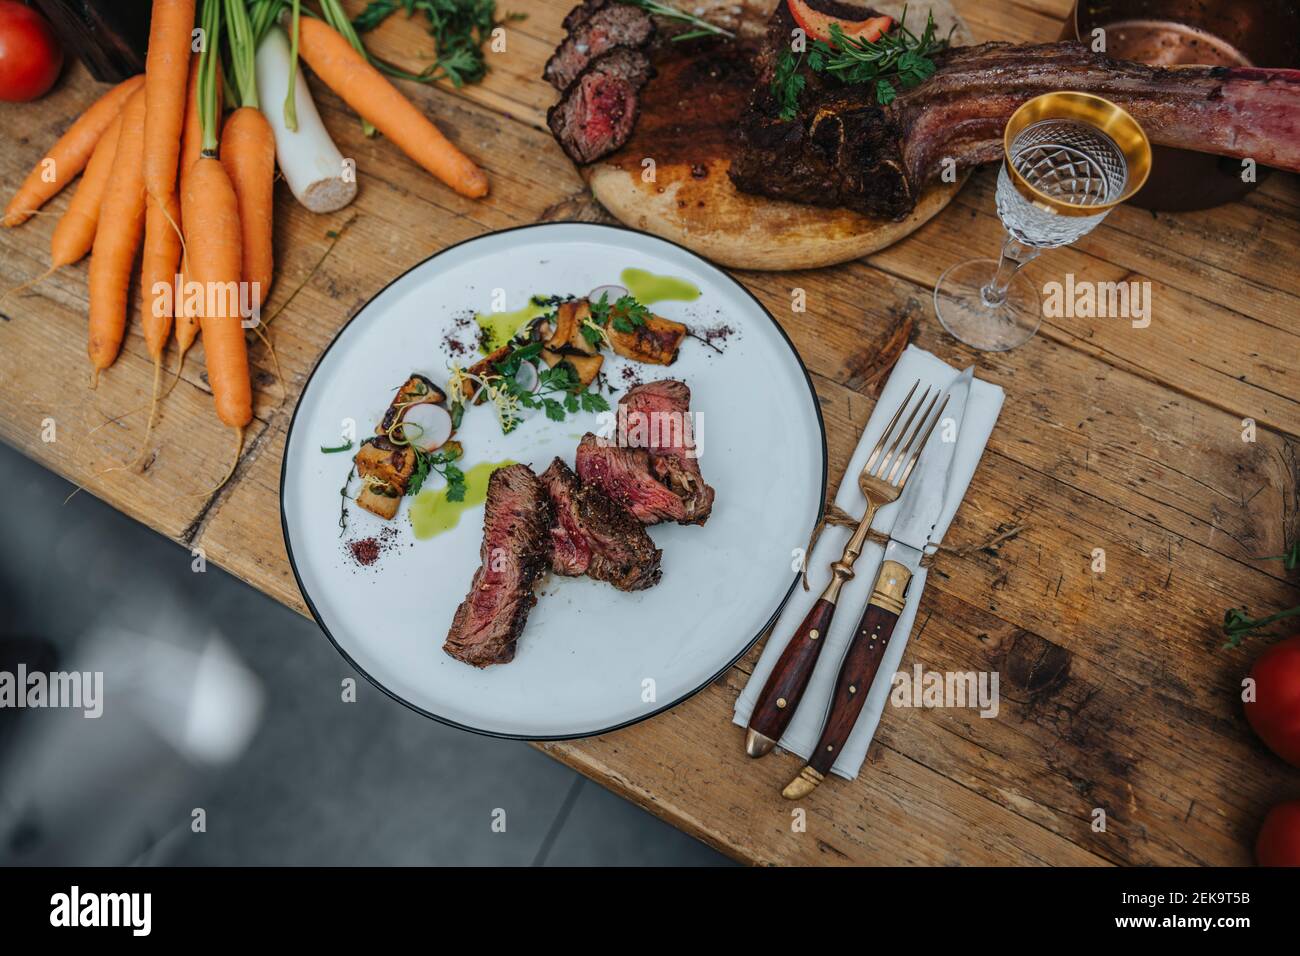 Tomahawk steak garnished with cooked vegetable in plate on kitchen island Stock Photo